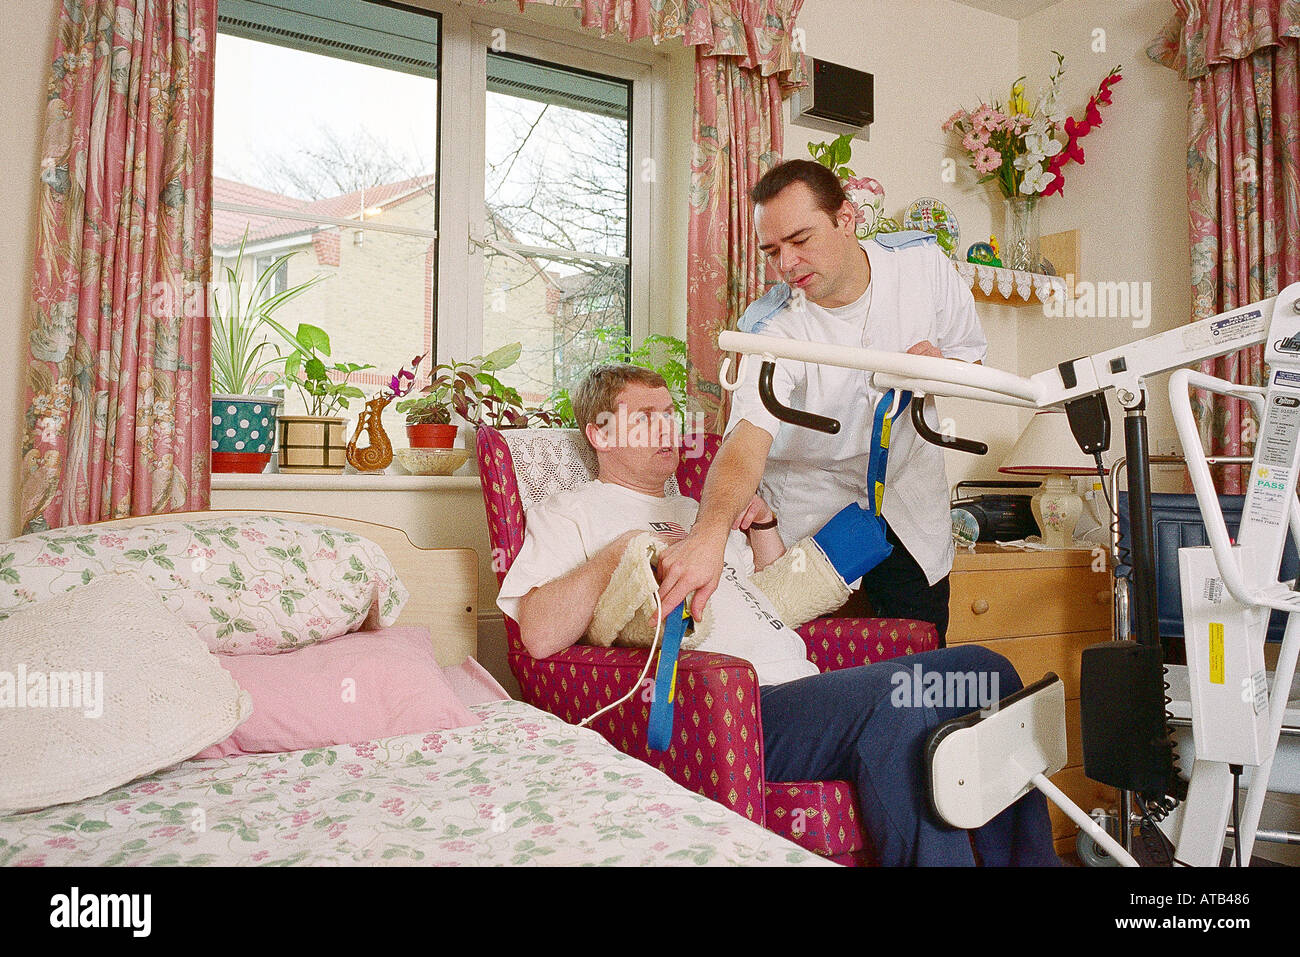 Moving and handling nurse moving patient using mobile hoist Stock Photo